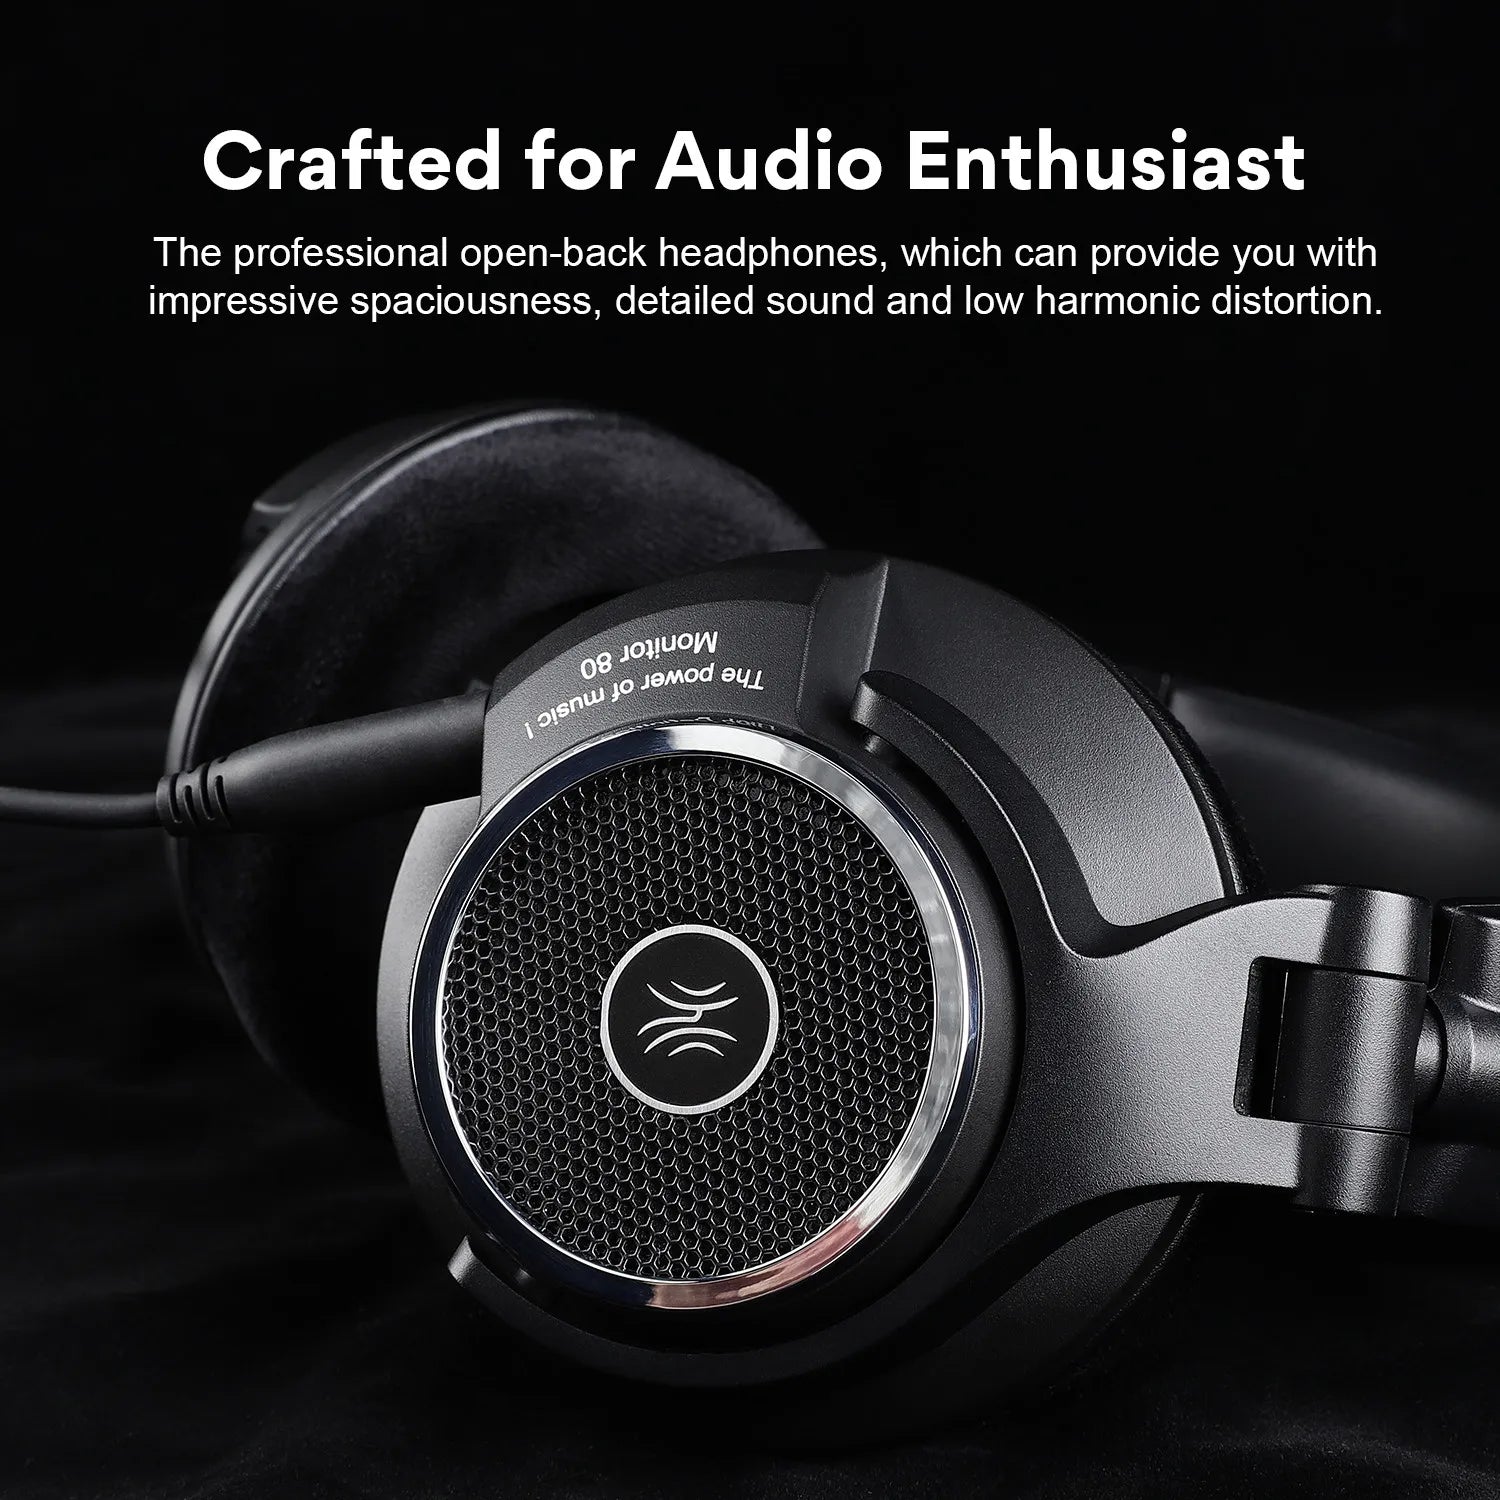 Oneodio Monitor 80 Open-Back Wired Over-Ear Headphones